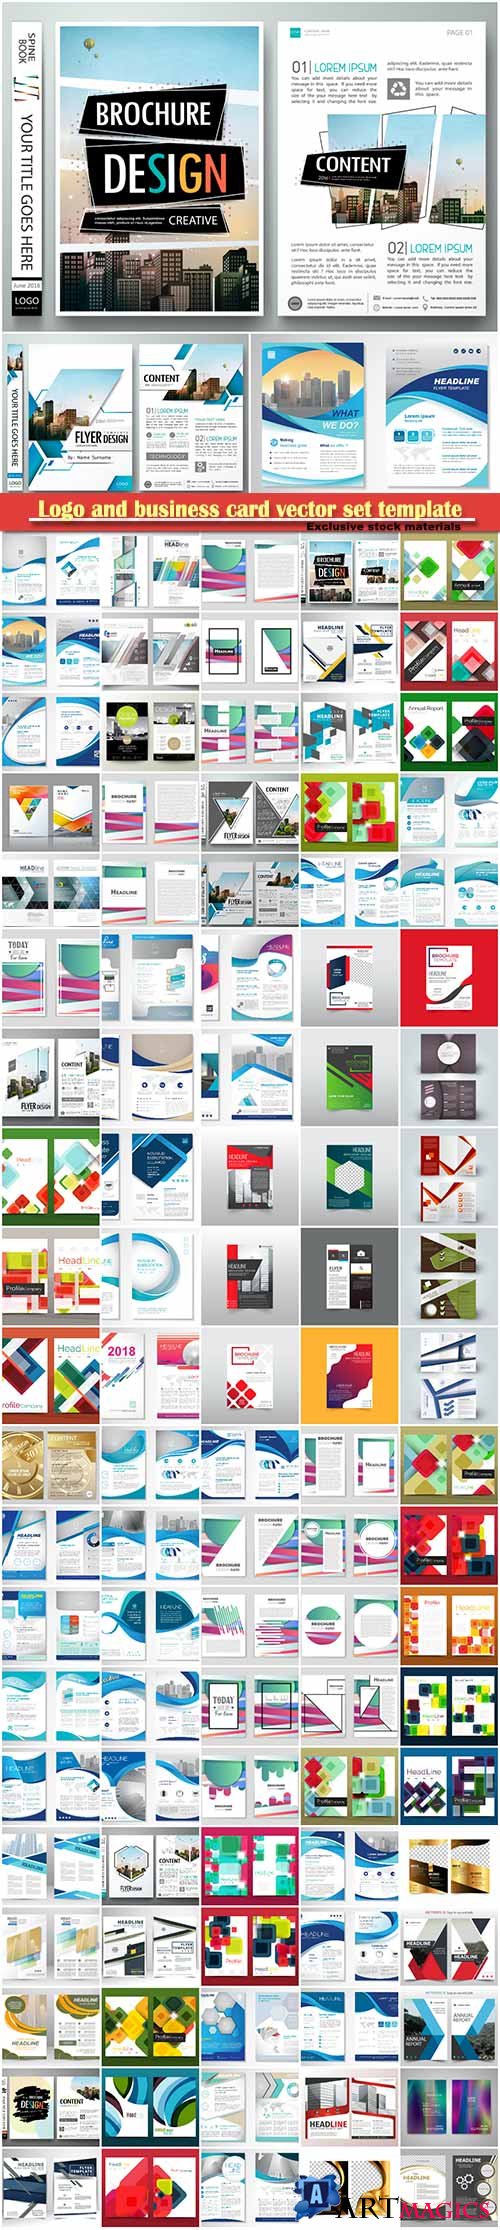 Logo and business card vector set template # 8